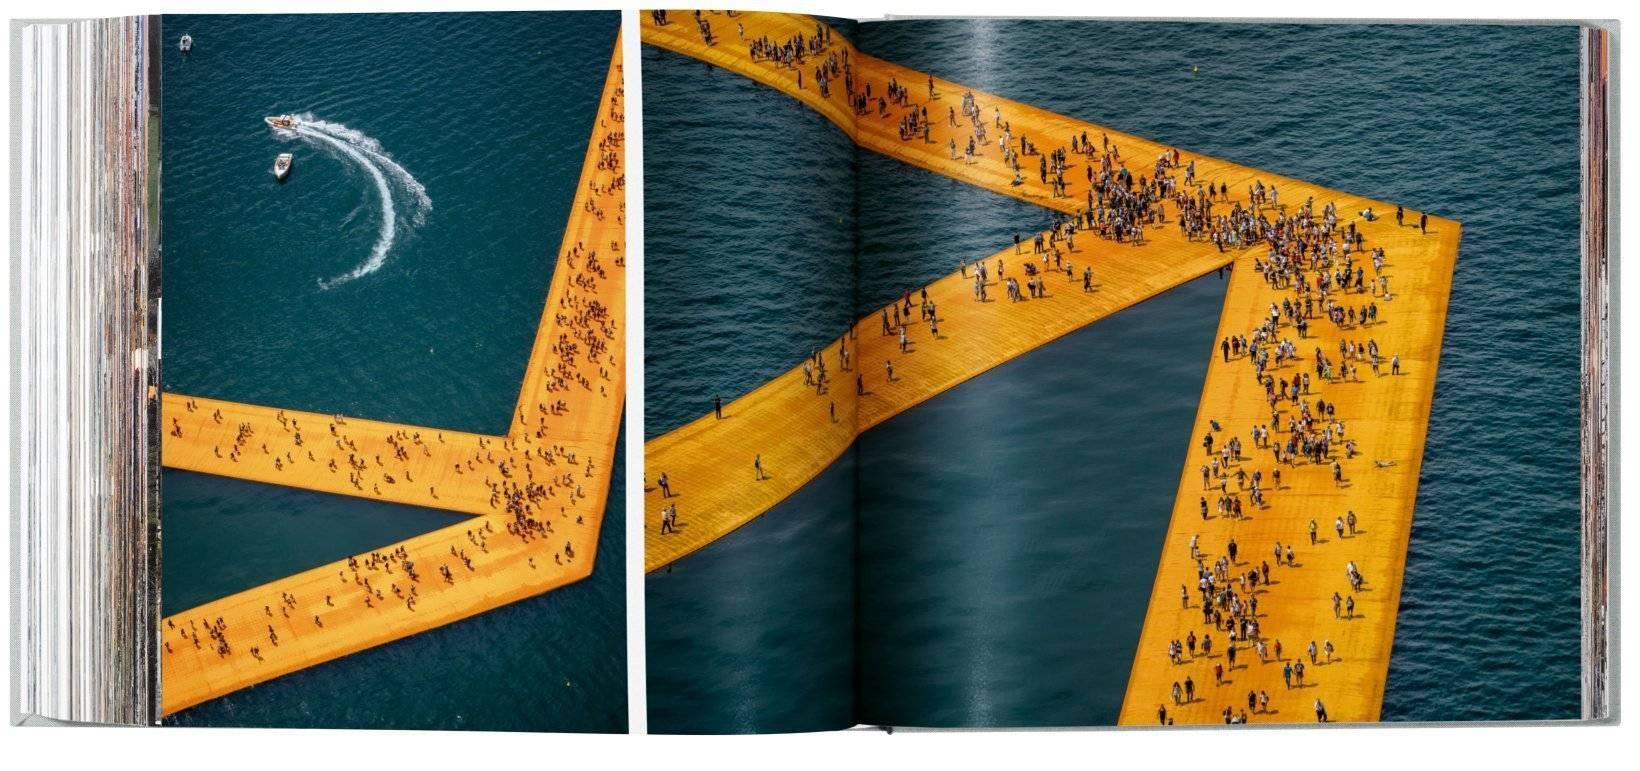 European Christo and Jeanne-Claude, the Floating Piers